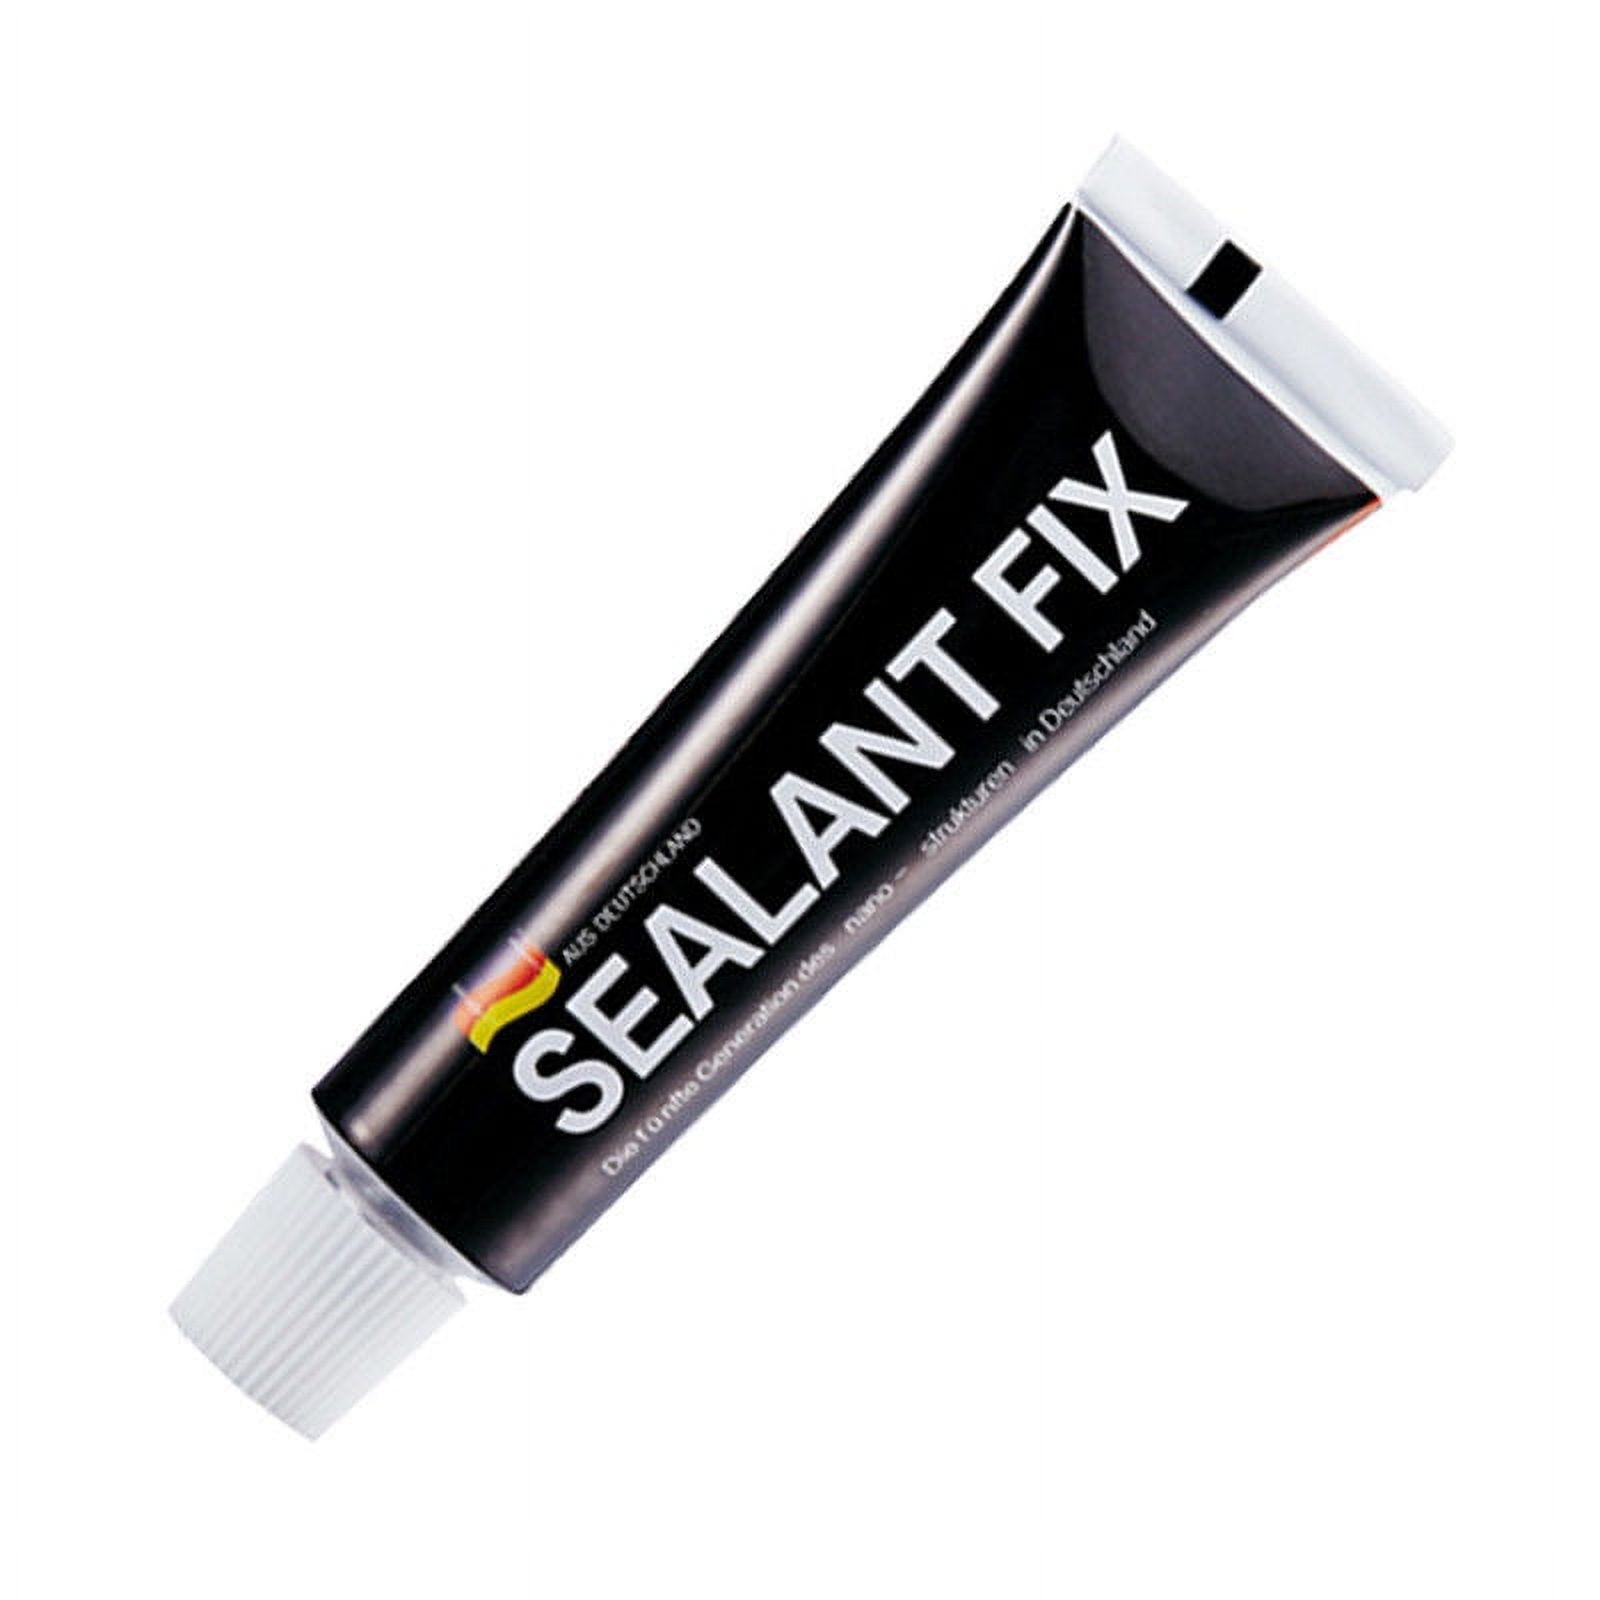 1pc 12ml Glass Glue Polymer Metal Adhesive Sealant Fix Quick Drying Waterproof Glue, Size: 12 mL, Other